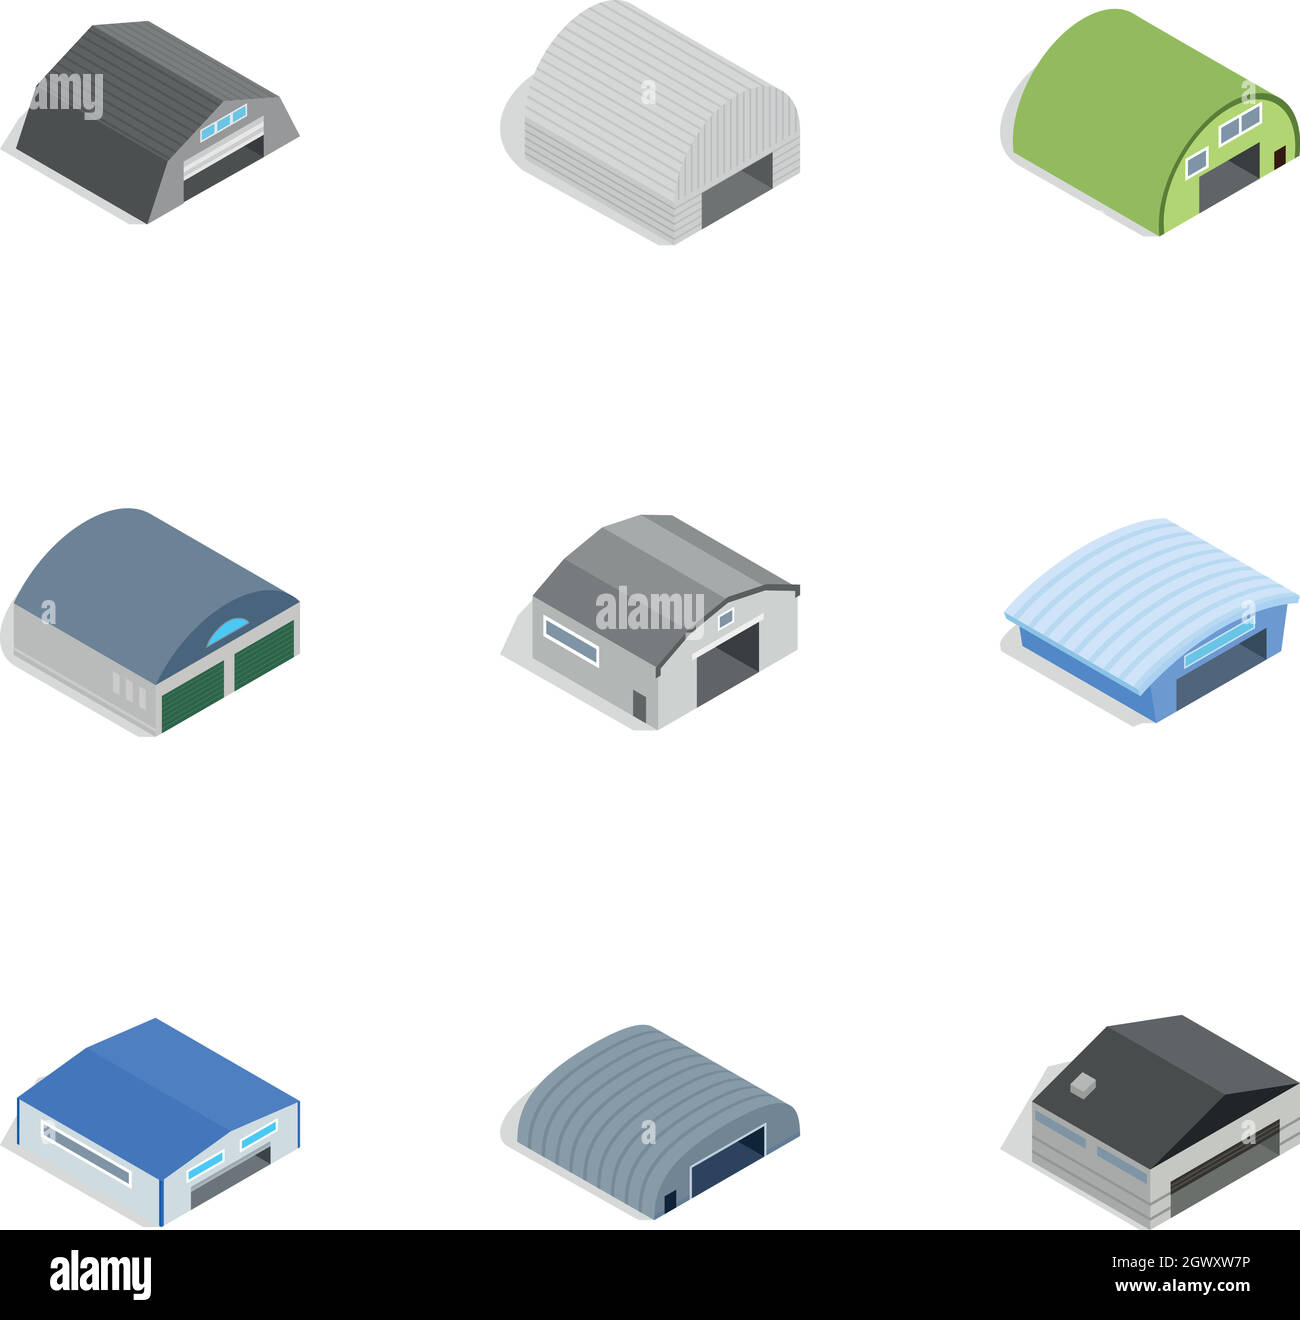 Types of warehouse icons, isometric 3d style Stock Vector